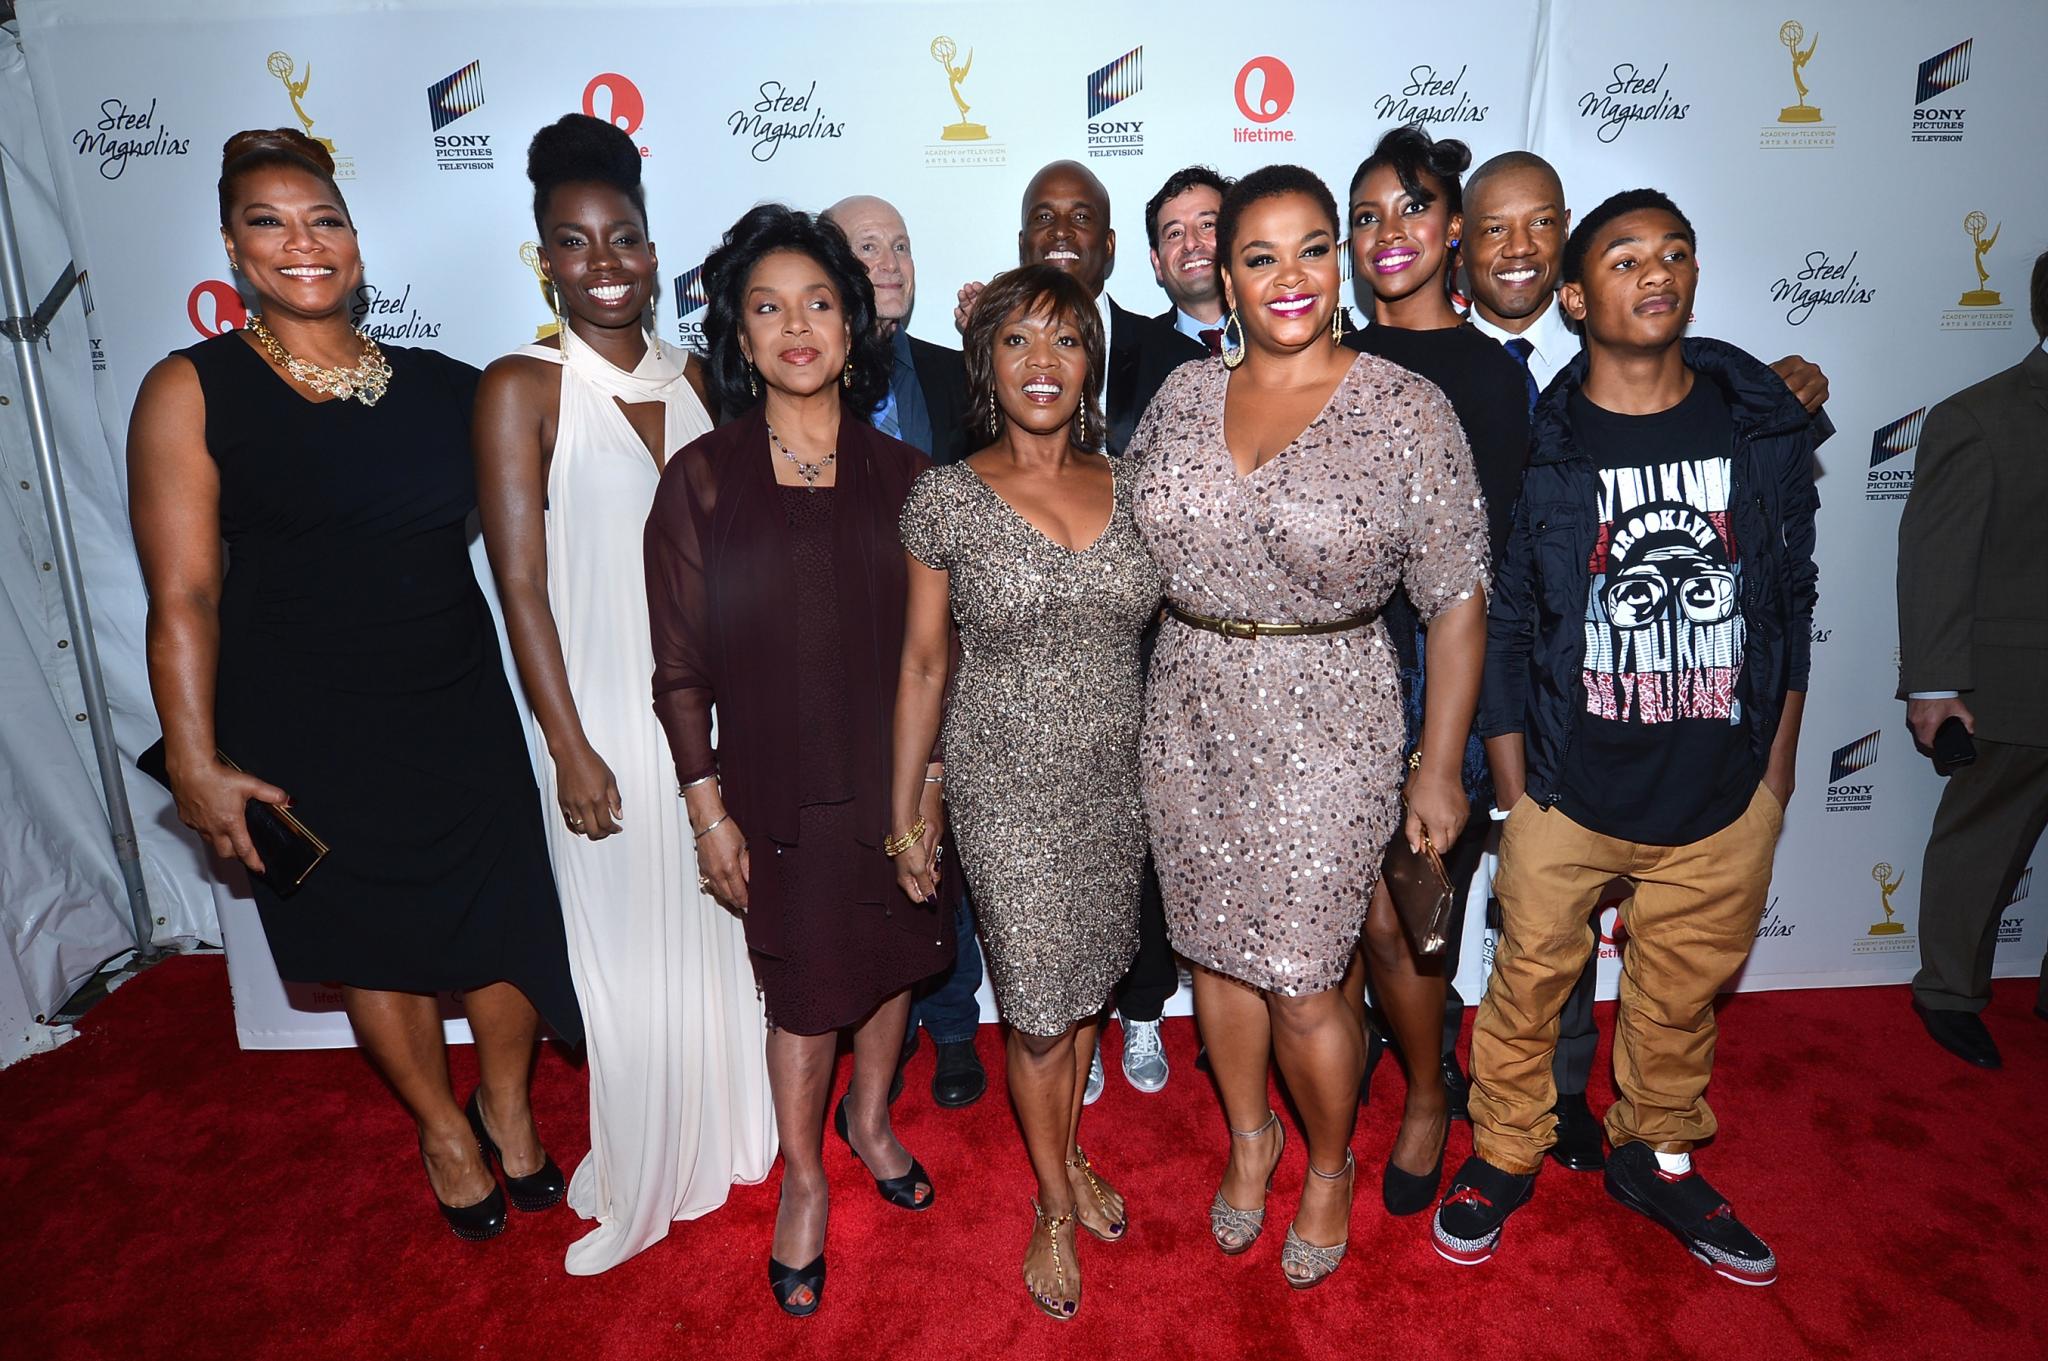 Check Out the Red Carpet at the 'Steel Magnolias' Premiere